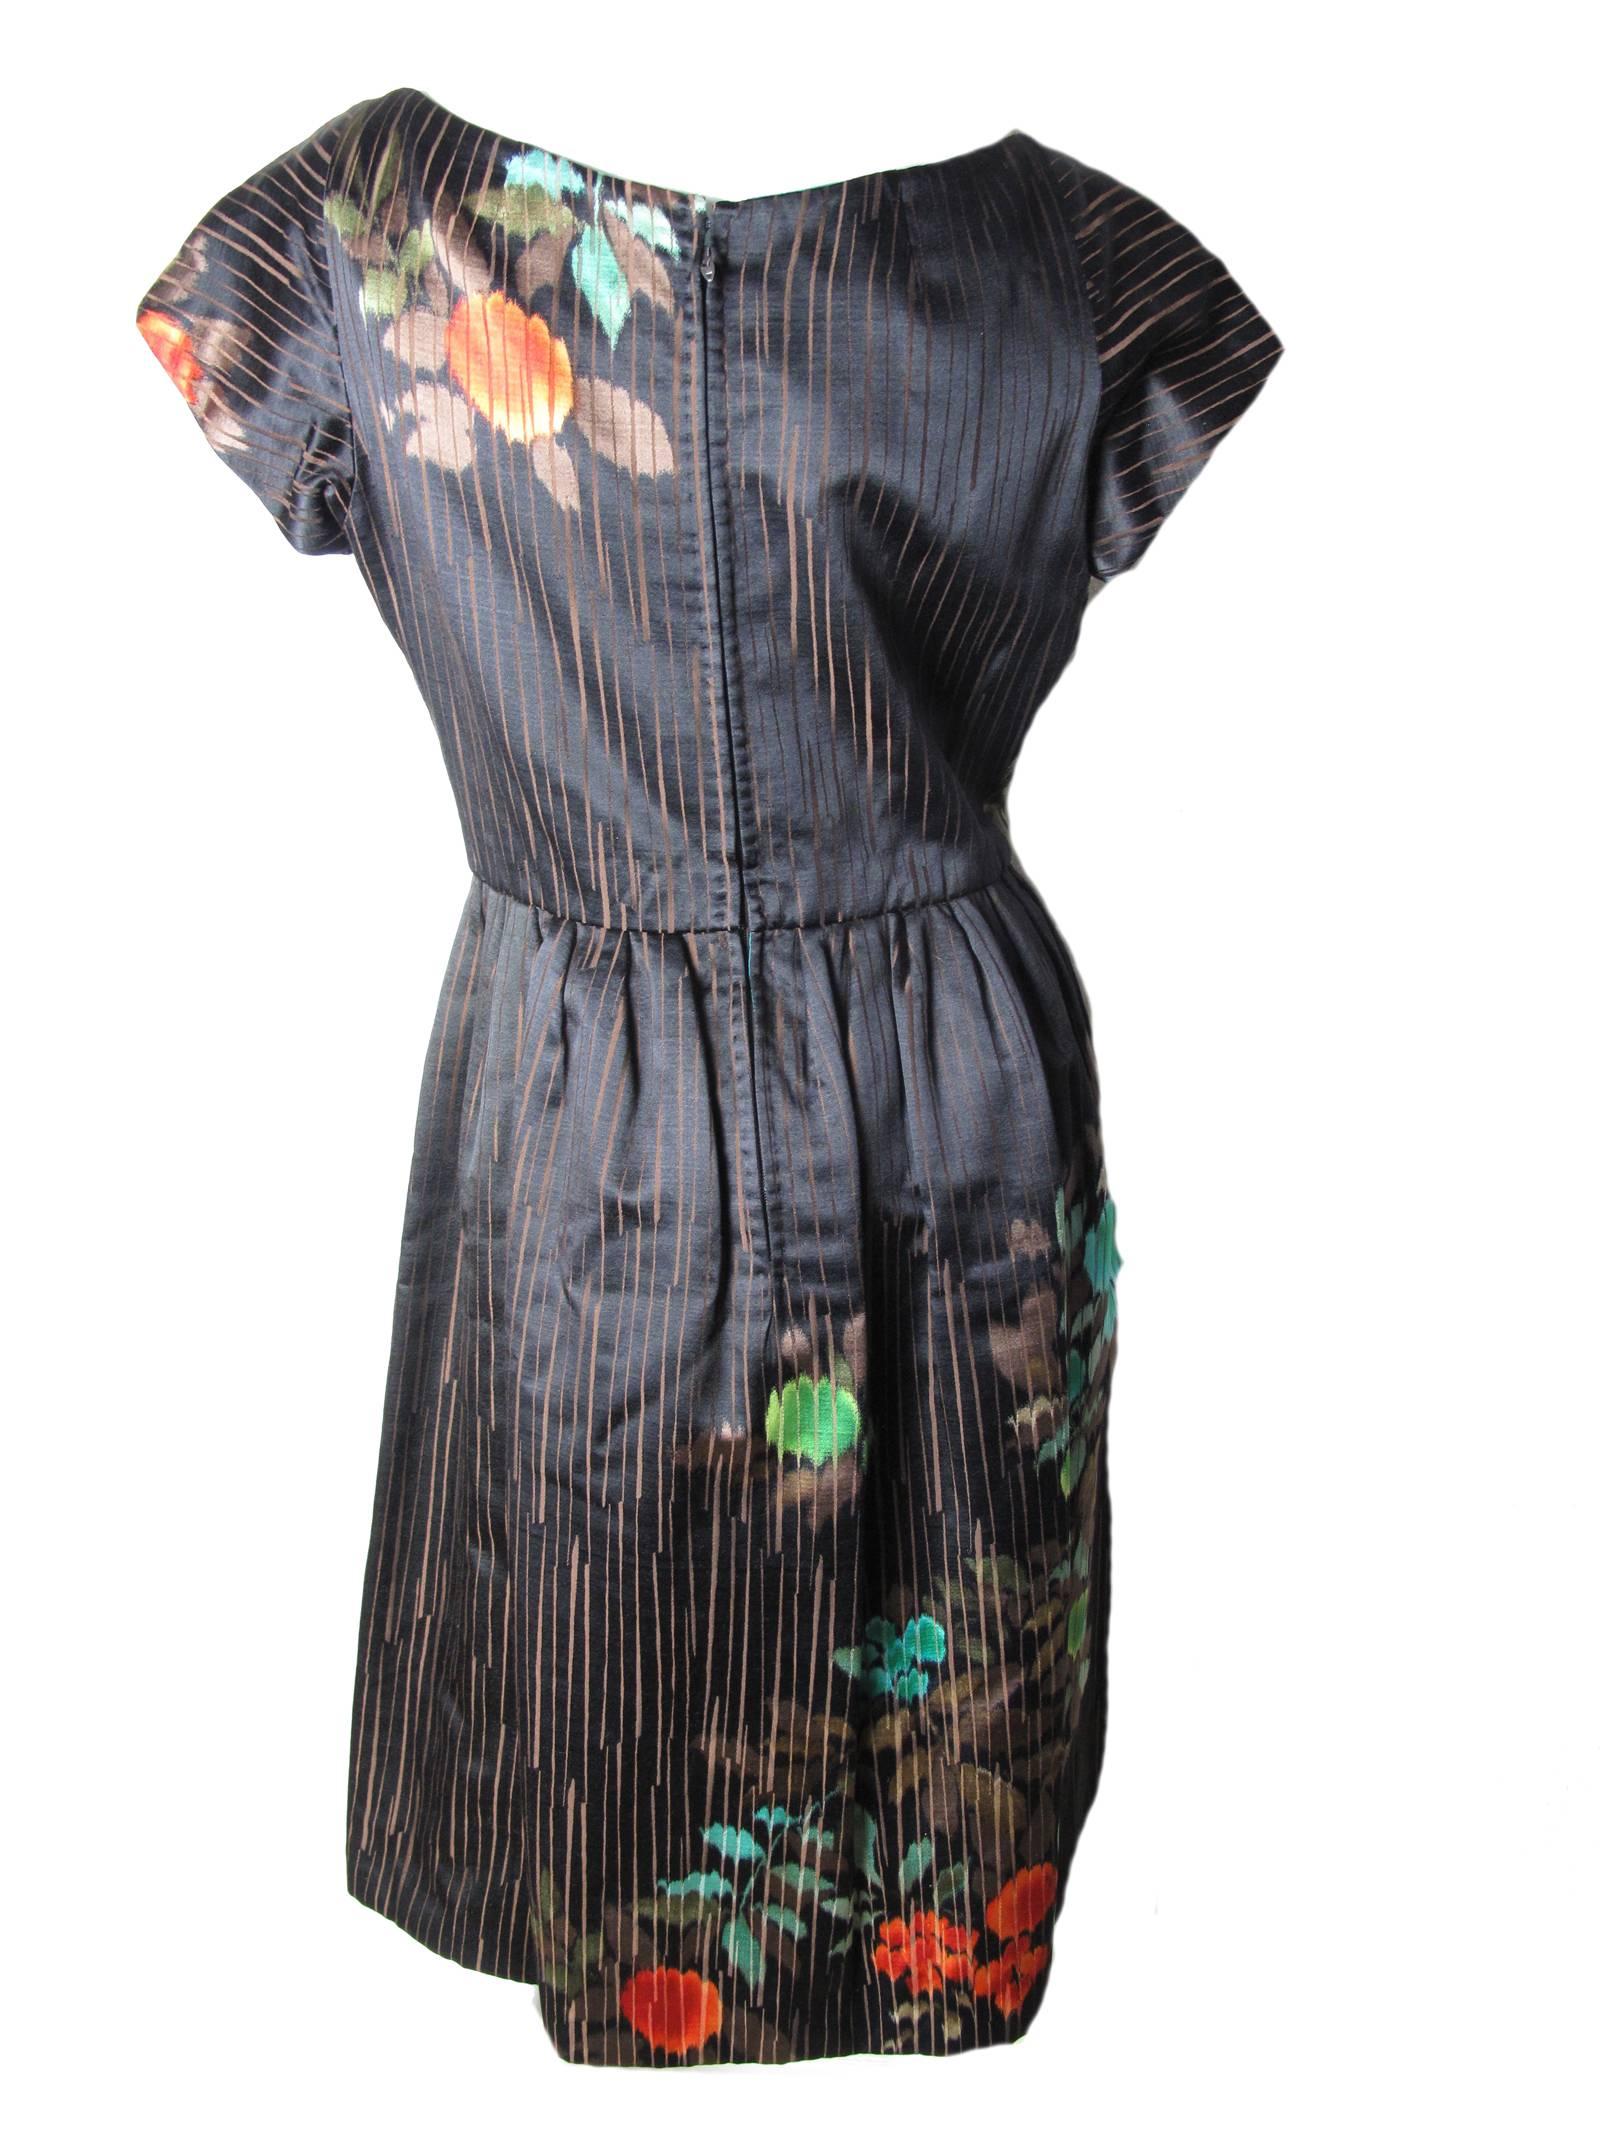 1950s Catherine Scott black satin cocktail dress with floral and stripe pattern. Condition: Excellent. Size 8

We accept returns for refund, please see our terms. We offer free ground shipping within the US. Please let us know if you have any